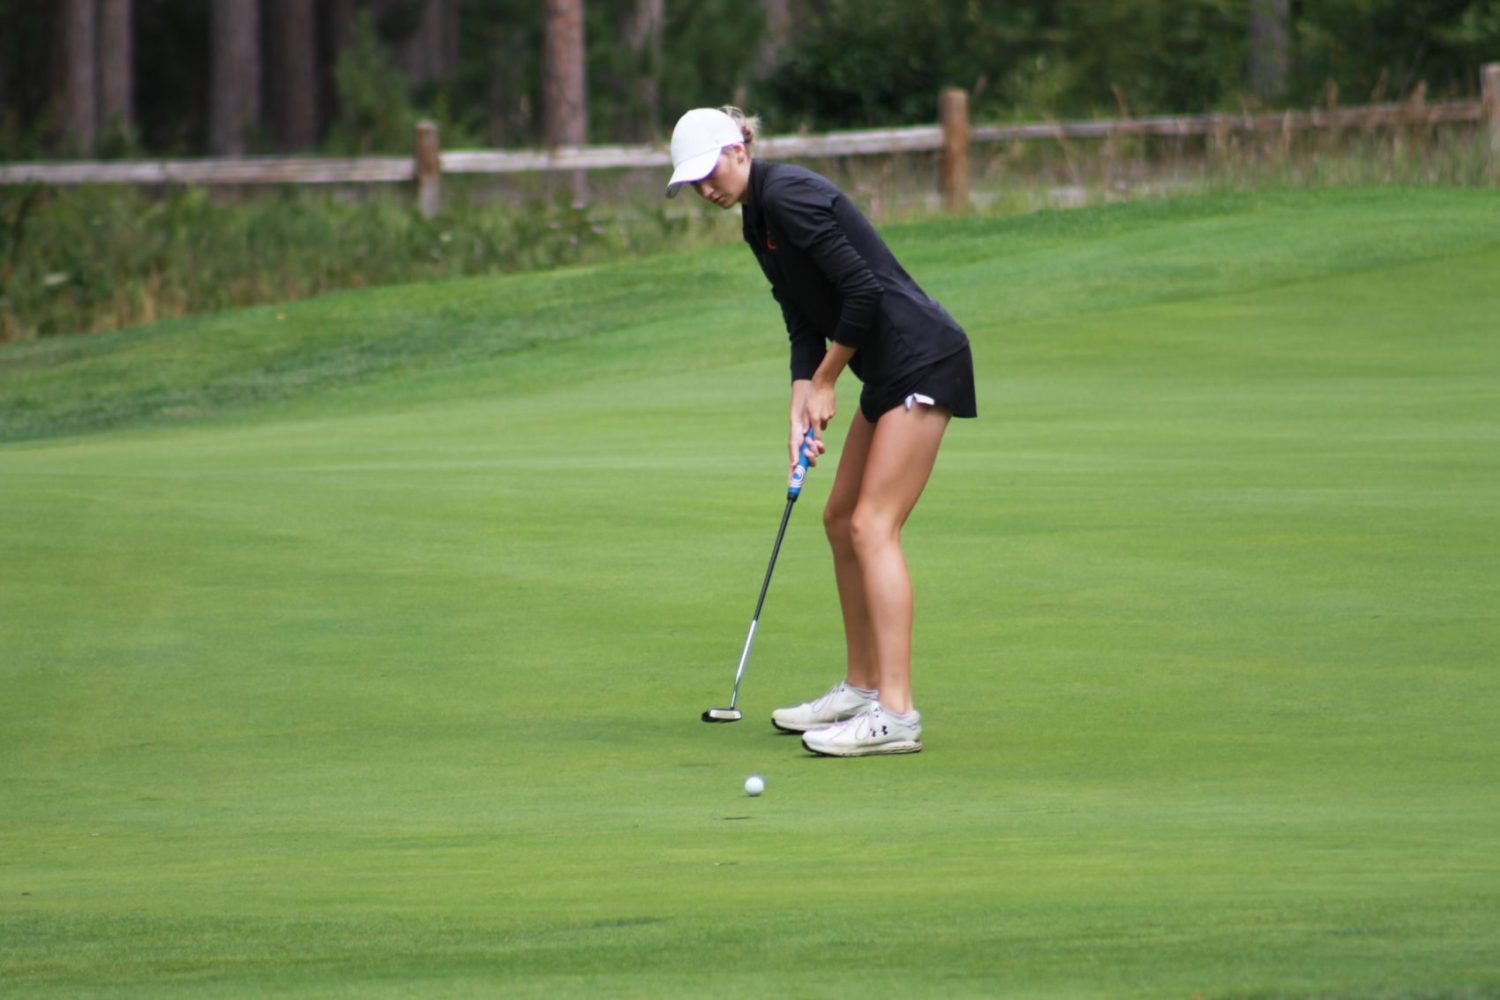 Ludington’s McKinley selected Local Sports Journal’s golfer of the month